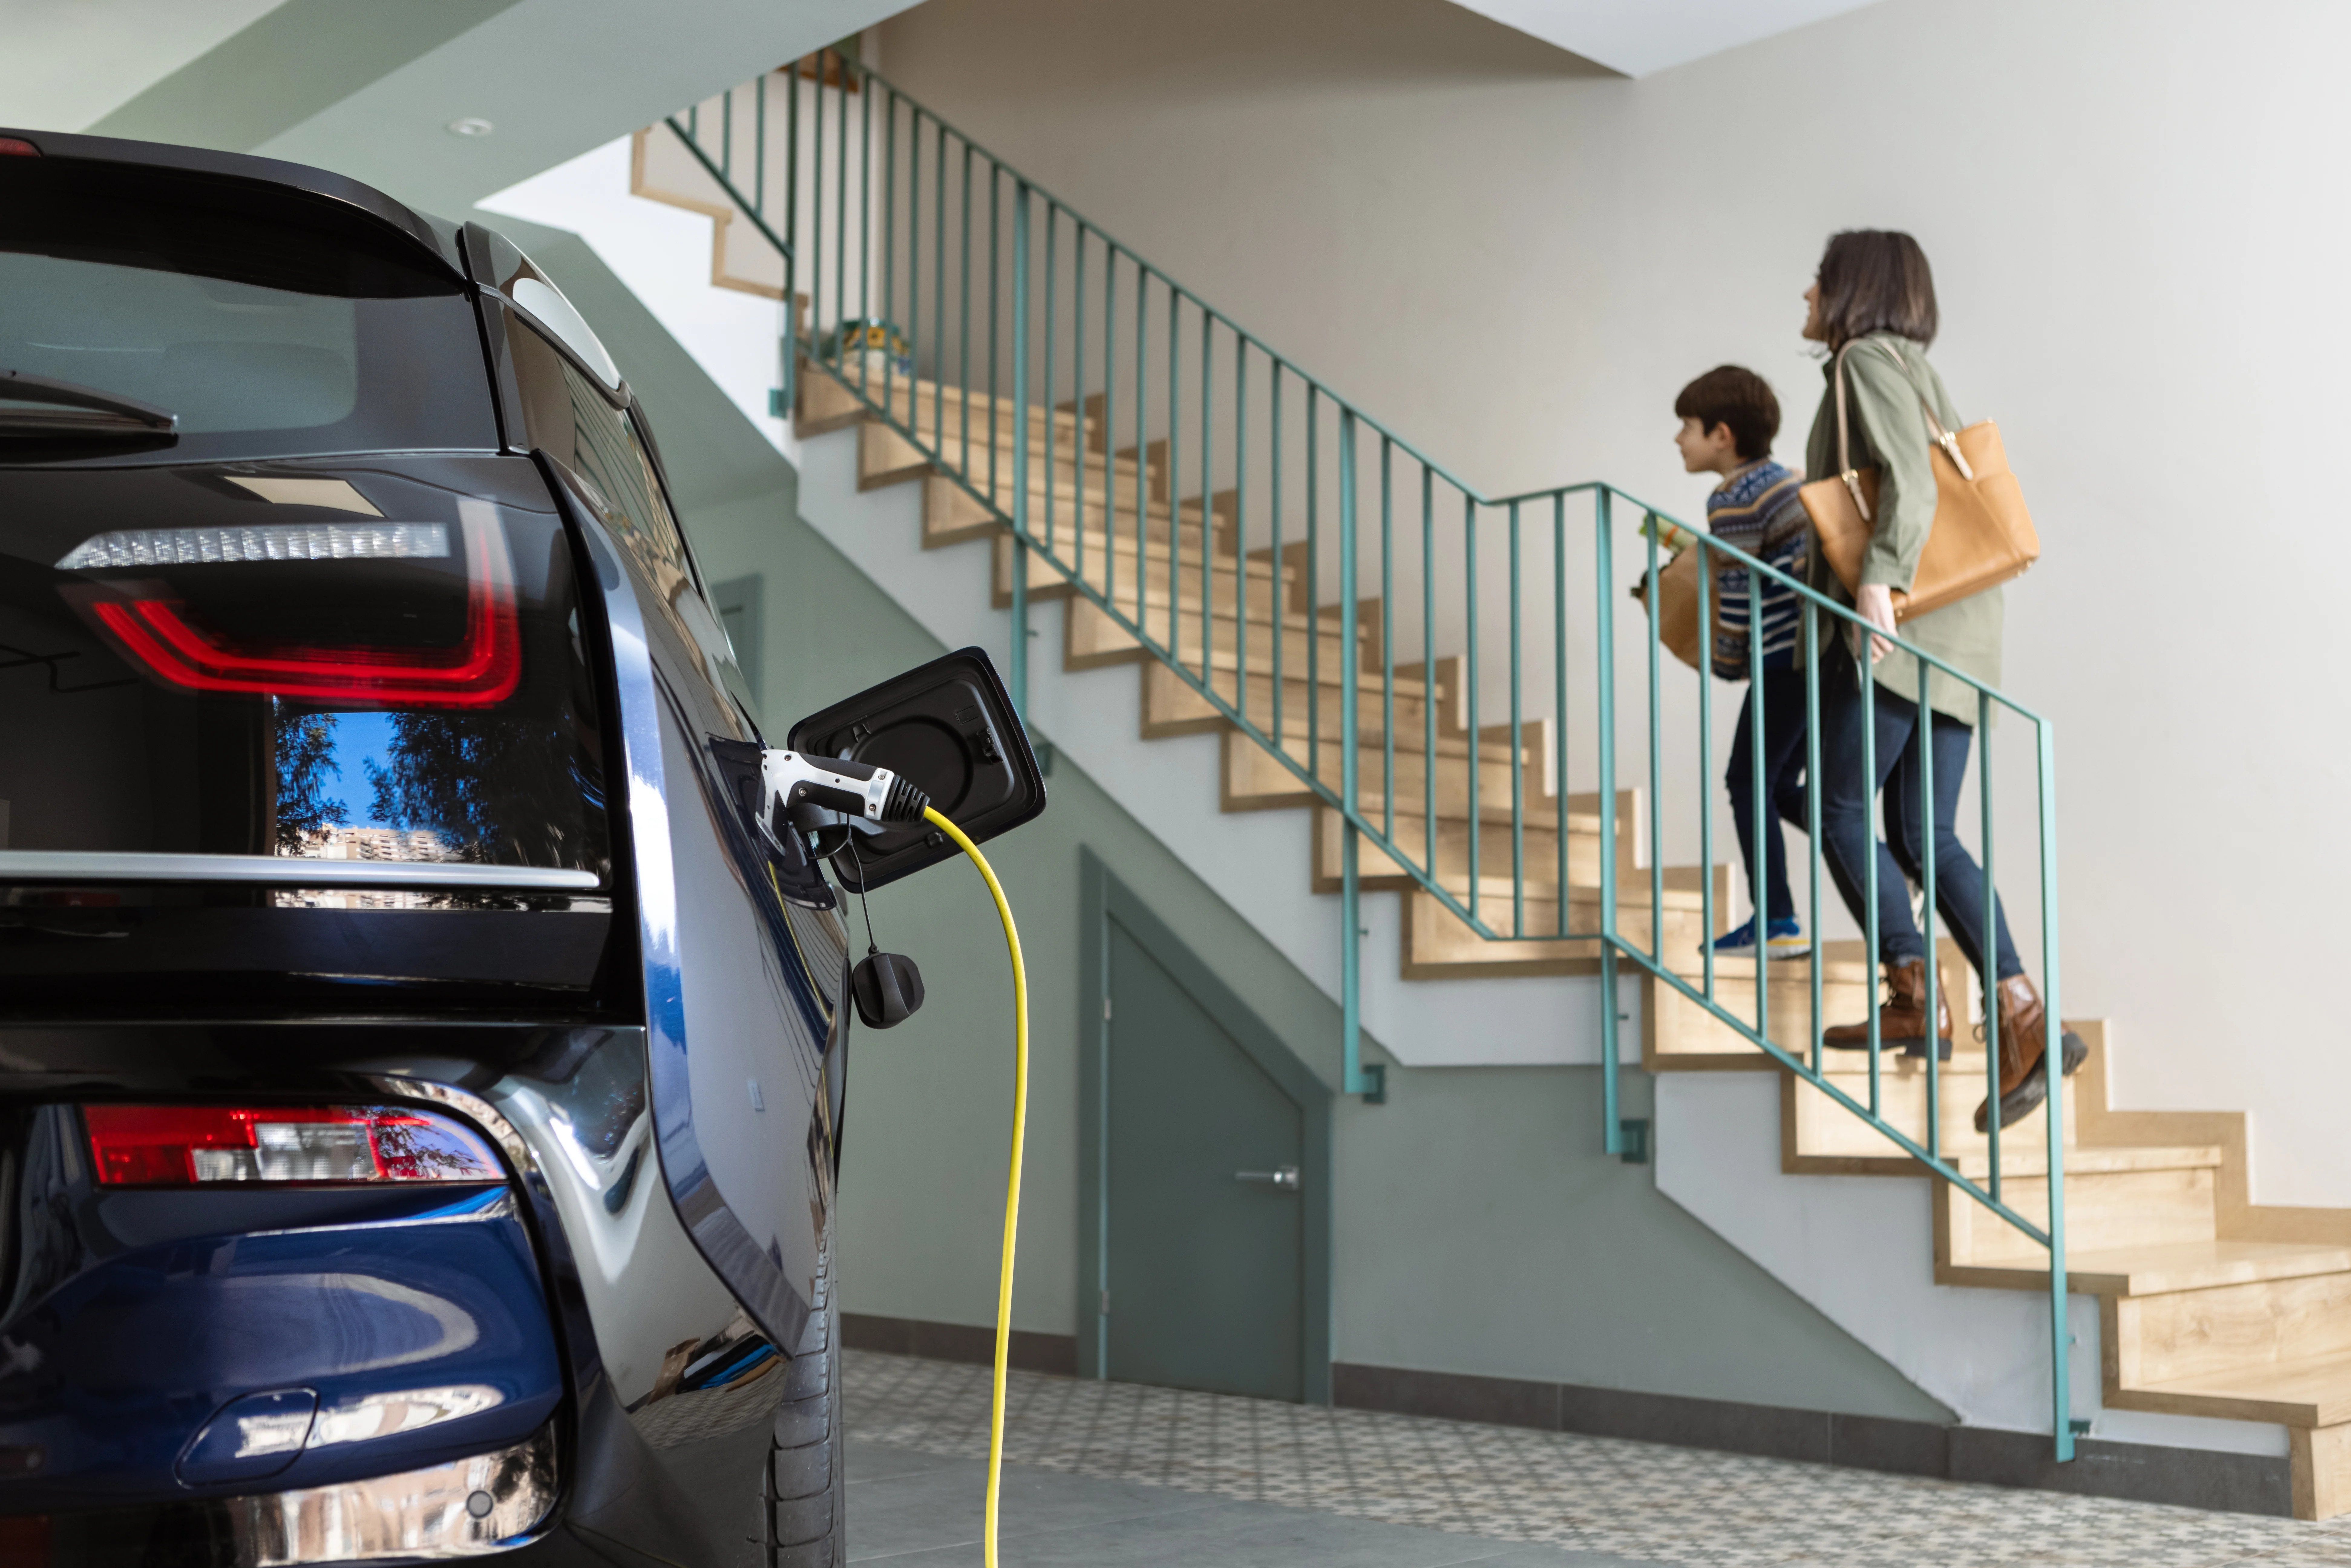 A blue electric car charging in a garage. In the background, a woman and a child are climbing the stairs to enter the house.